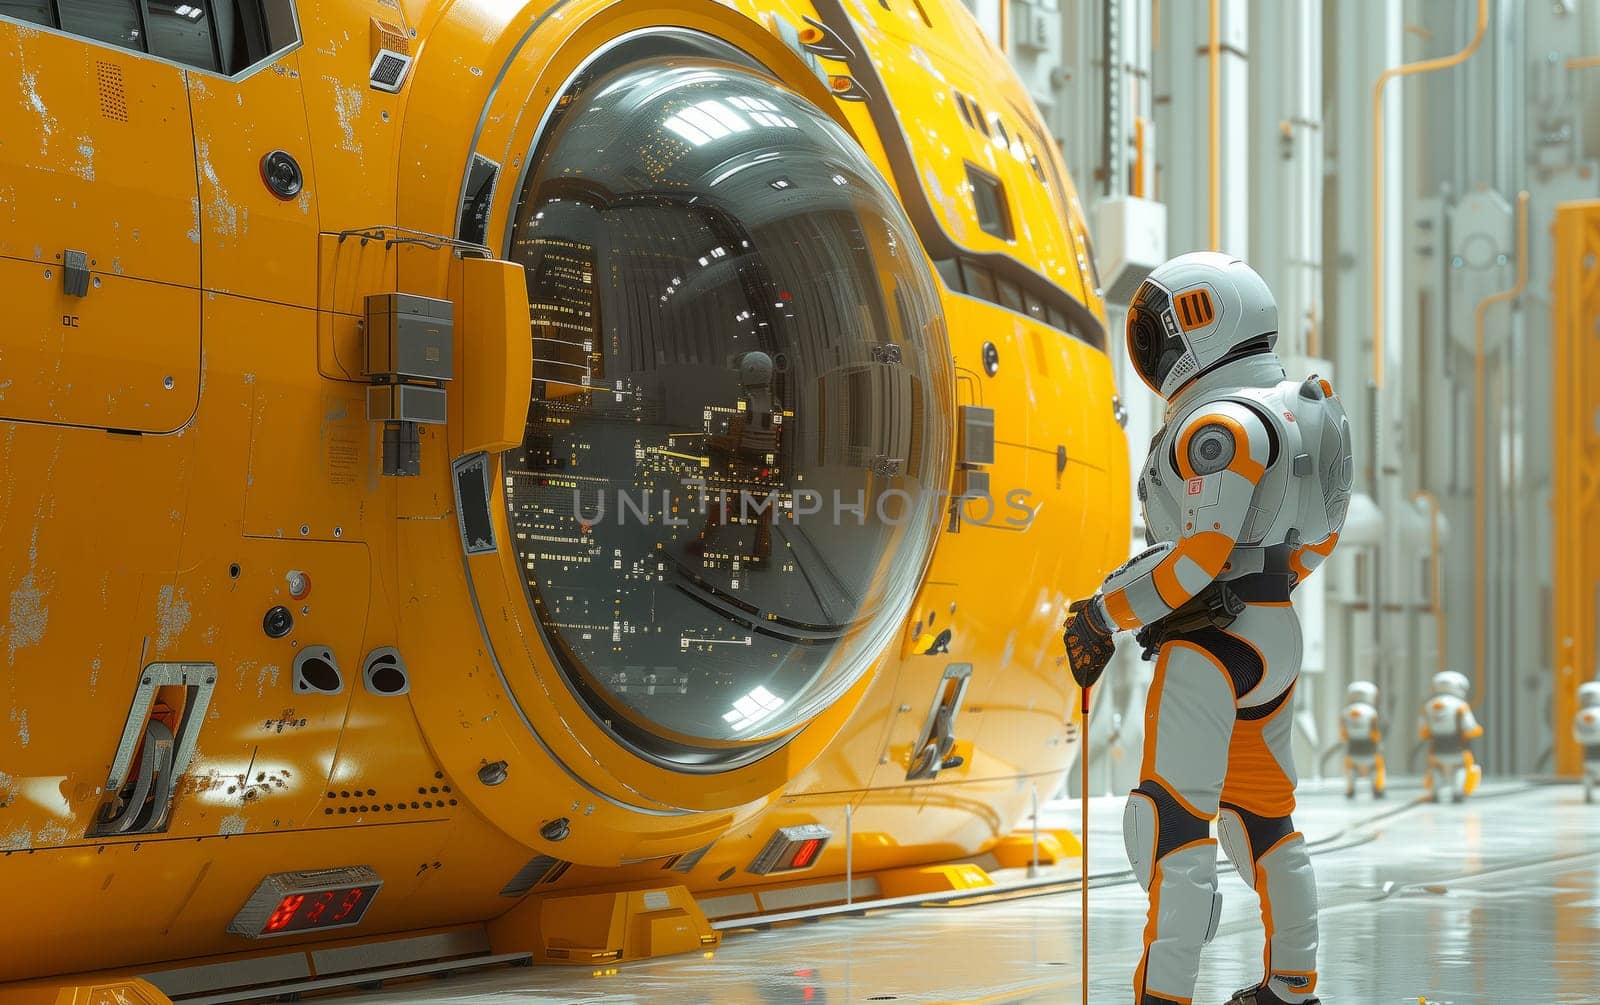 A man in workwear stands by a yellow vehicle in space by richwolf